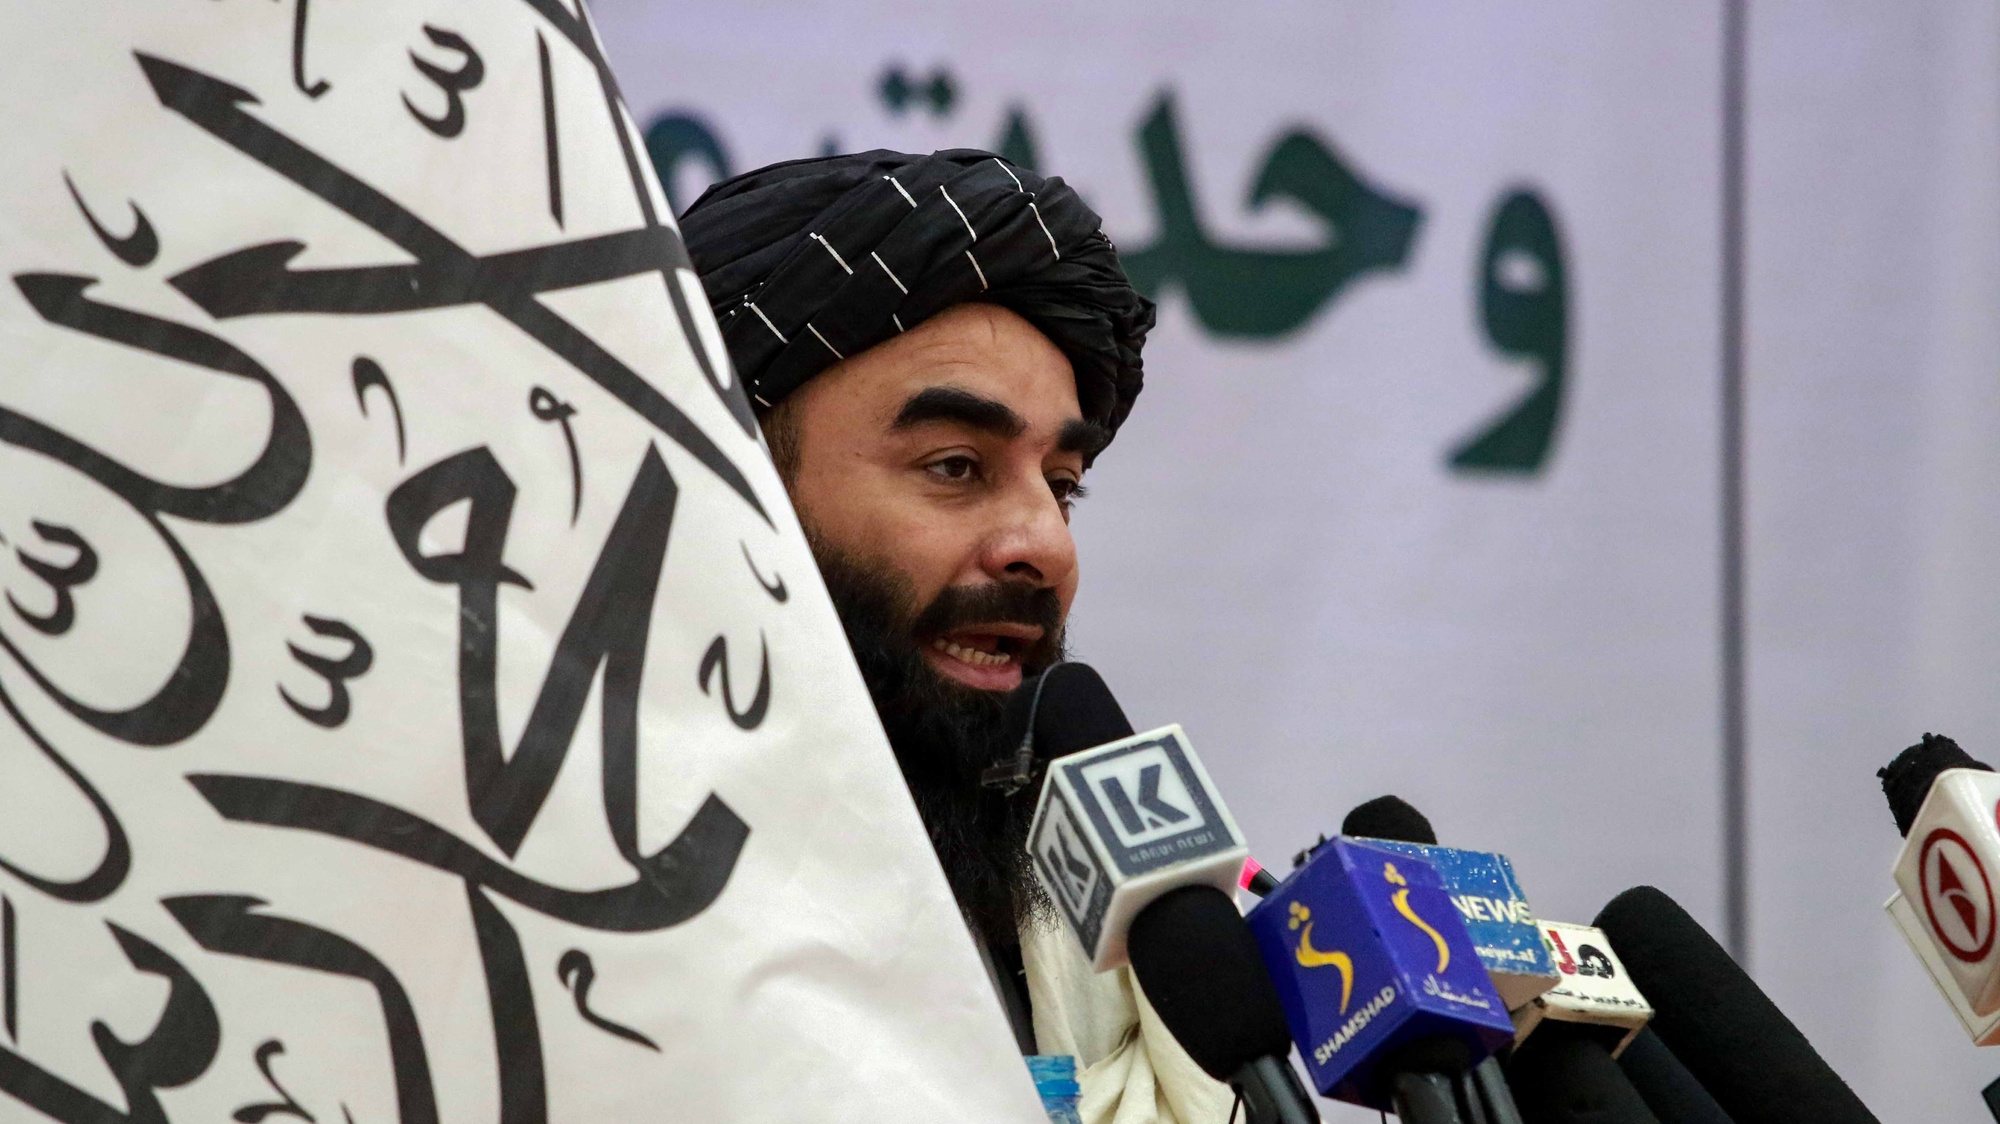 epa09602612 Taliban&#039;s spokesman Zabiullah Mujahid talks with audience during a ceremony in which Shi&#039;ite Muslims and their elders gathered to promote inter-faith harmony, in Kabul, Afghanistan, 25 November 2021. According to a press release issued by the Taliban, the participants of the meeting expressed their support for the Taliban government, and stressed on the unity among the nations and religions in the country. Despite facing strong opposition, the IS militants who have been actively targeting the Shi&#039;ite Muslims and Taliban, has a strong presence in the capital and remote areas of Nangarhar and has now emerged as a major threat to the Taliban, being able to carry out attacks such as the one at Kabul airport on August 26 leaving at least 170 dead.  EPA/STRINGER